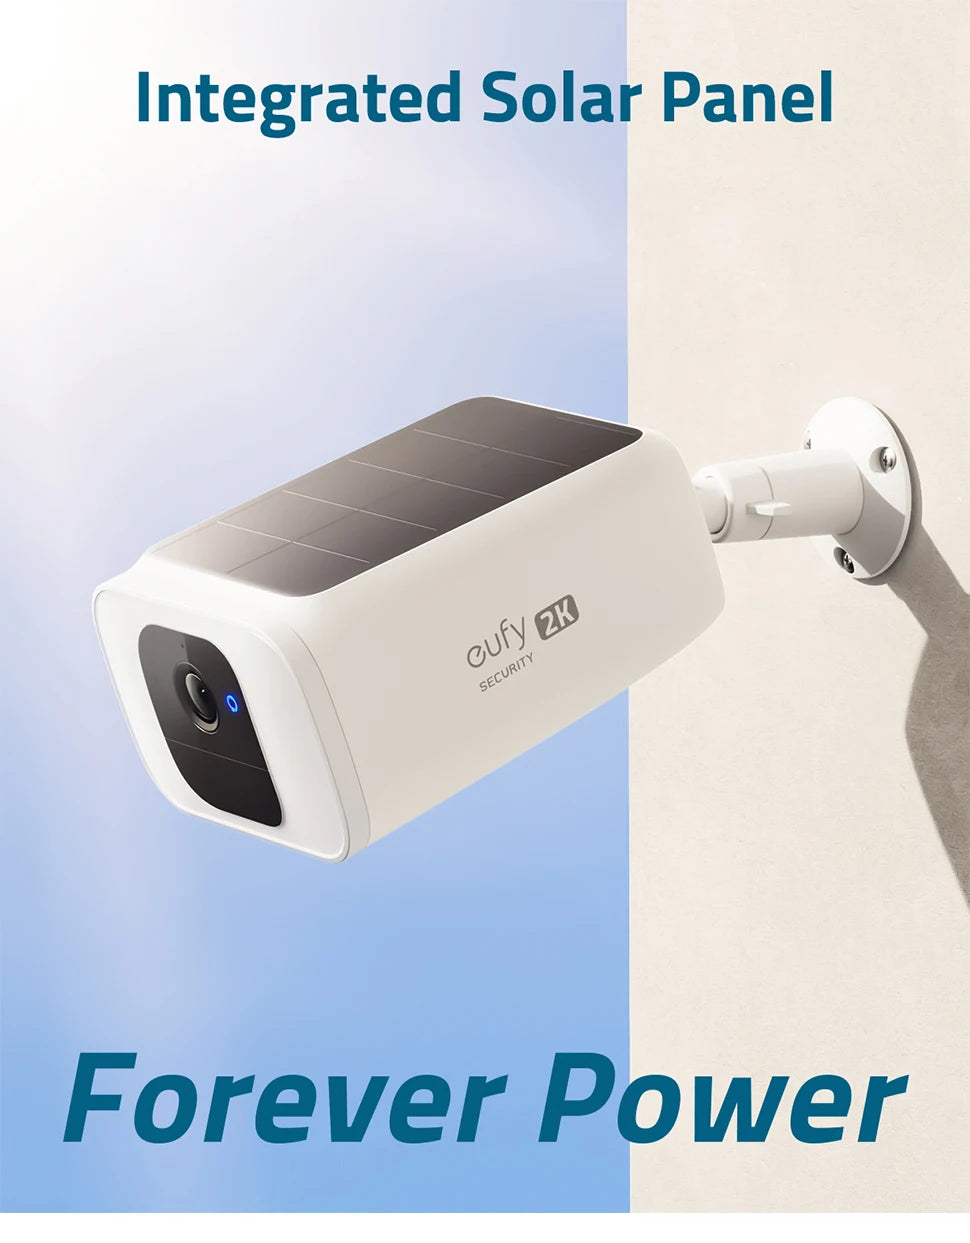 Eufy S40 Security SoloCam, Solar-powered security camera with perpetual power and advanced outdoor surveillance capabilities.